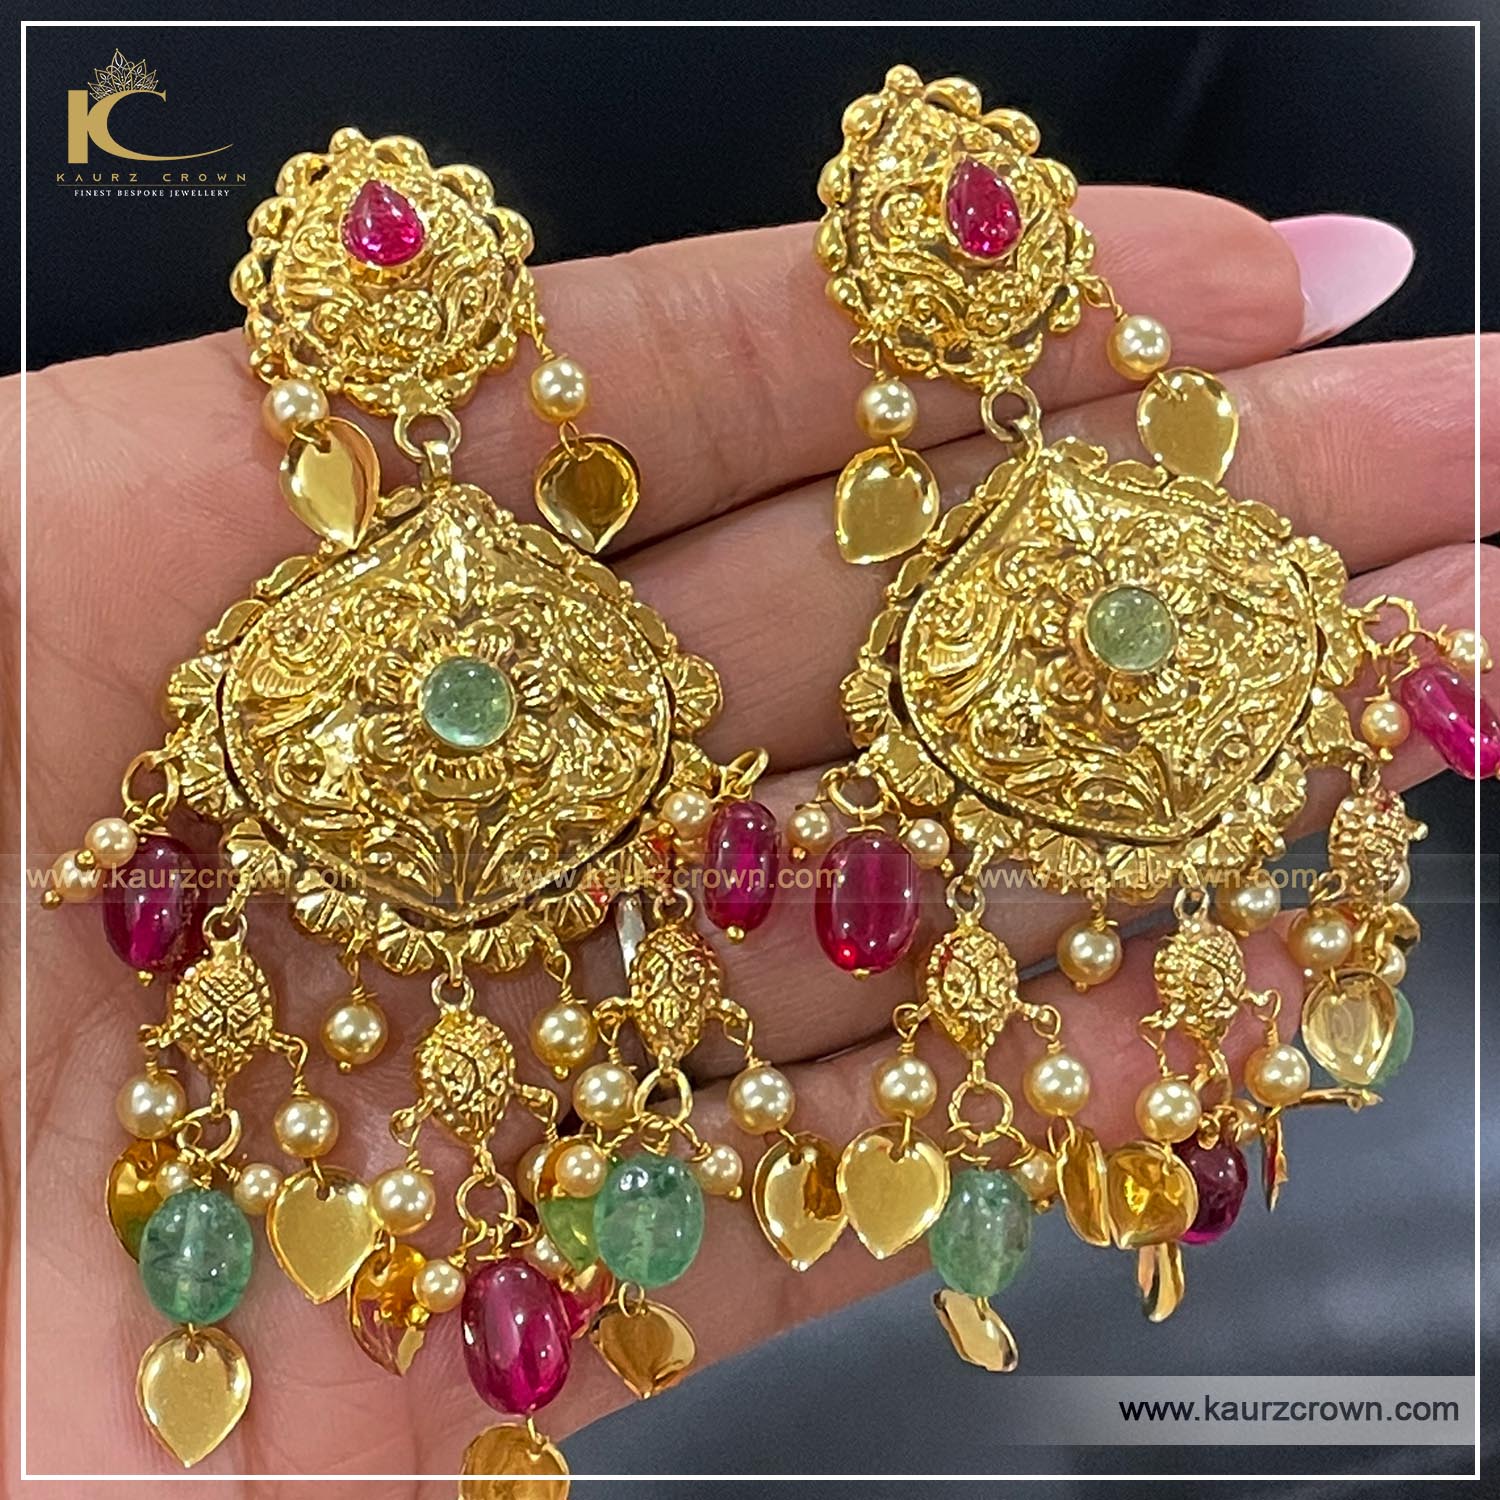 Cherish the aura of this whimsical red 23 k gold thewa earrings with dankes  , beaded in real citrine gemstones is followed by 3 micron… | Instagram